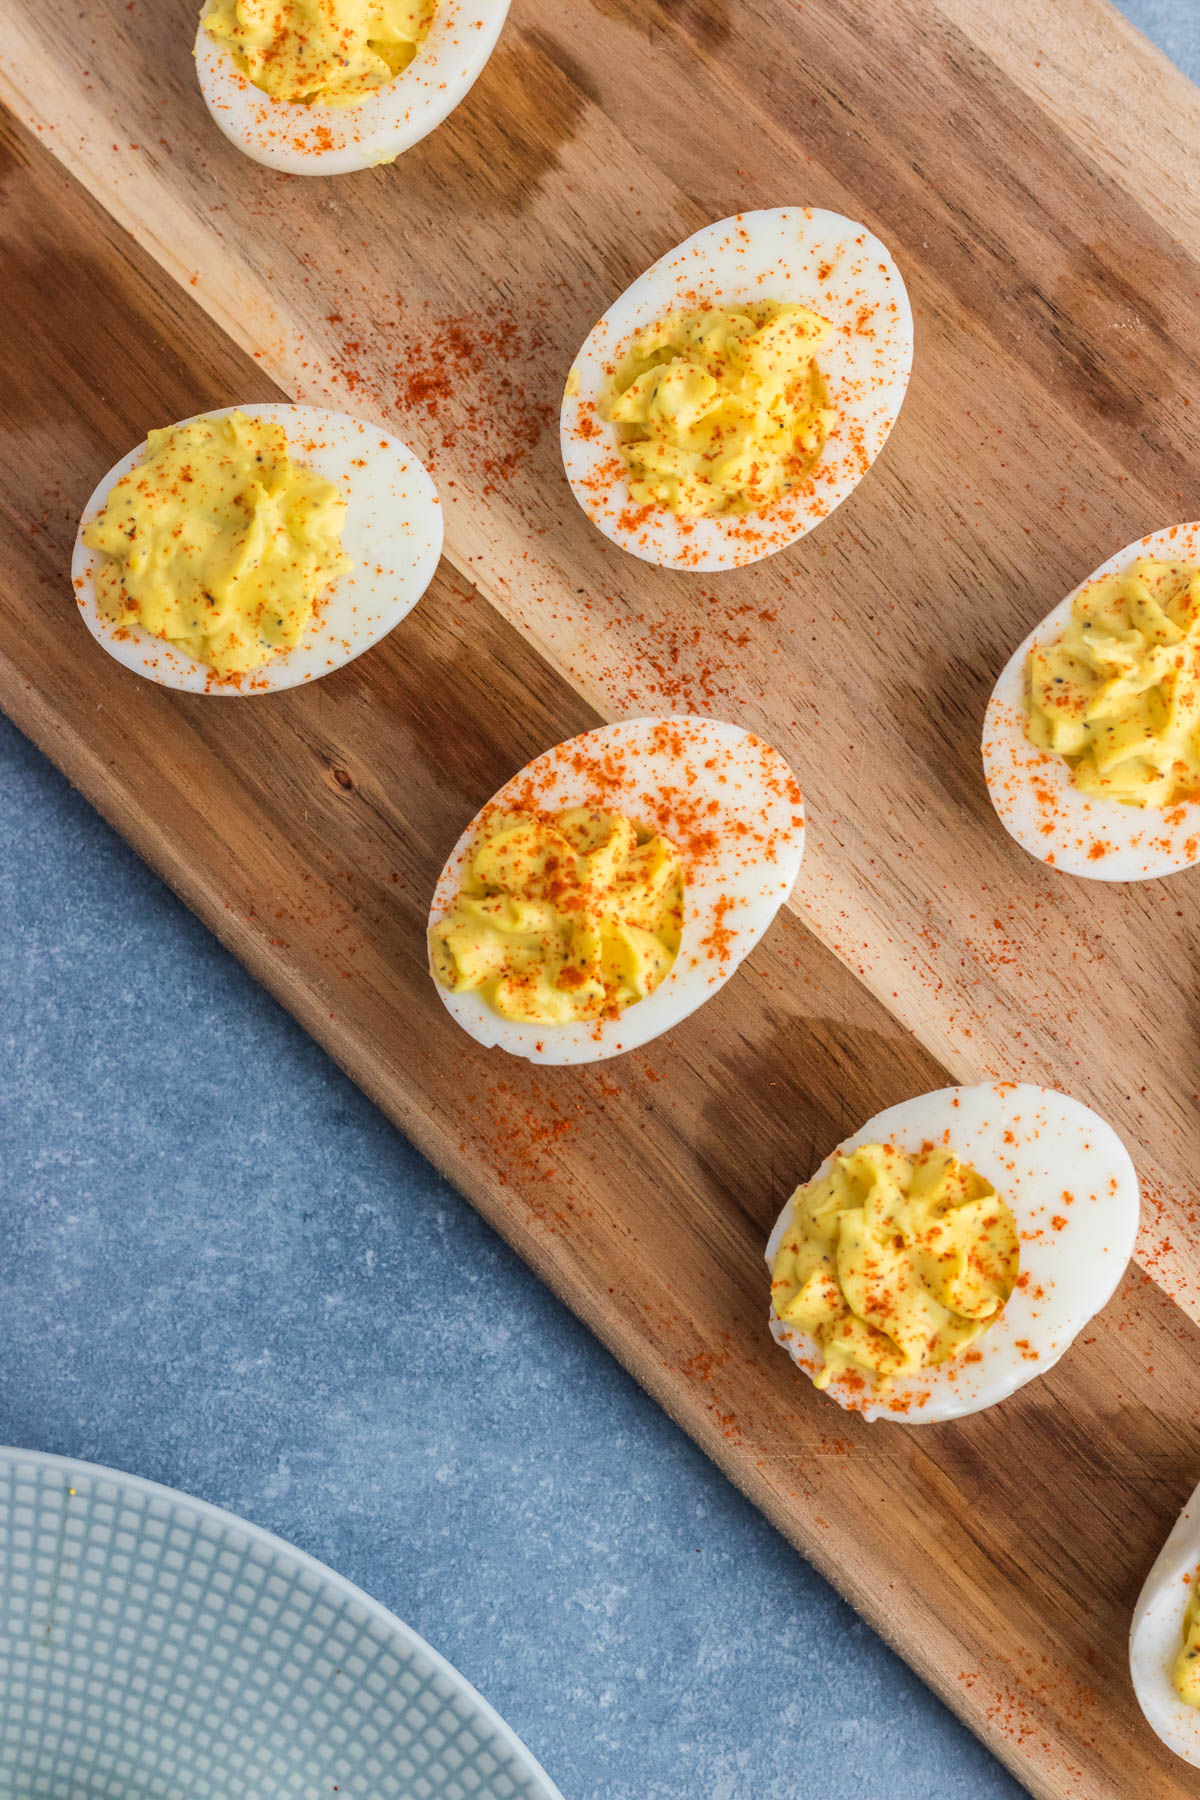 Deviled eggs sprinkled with paprika on a wooden serving board.